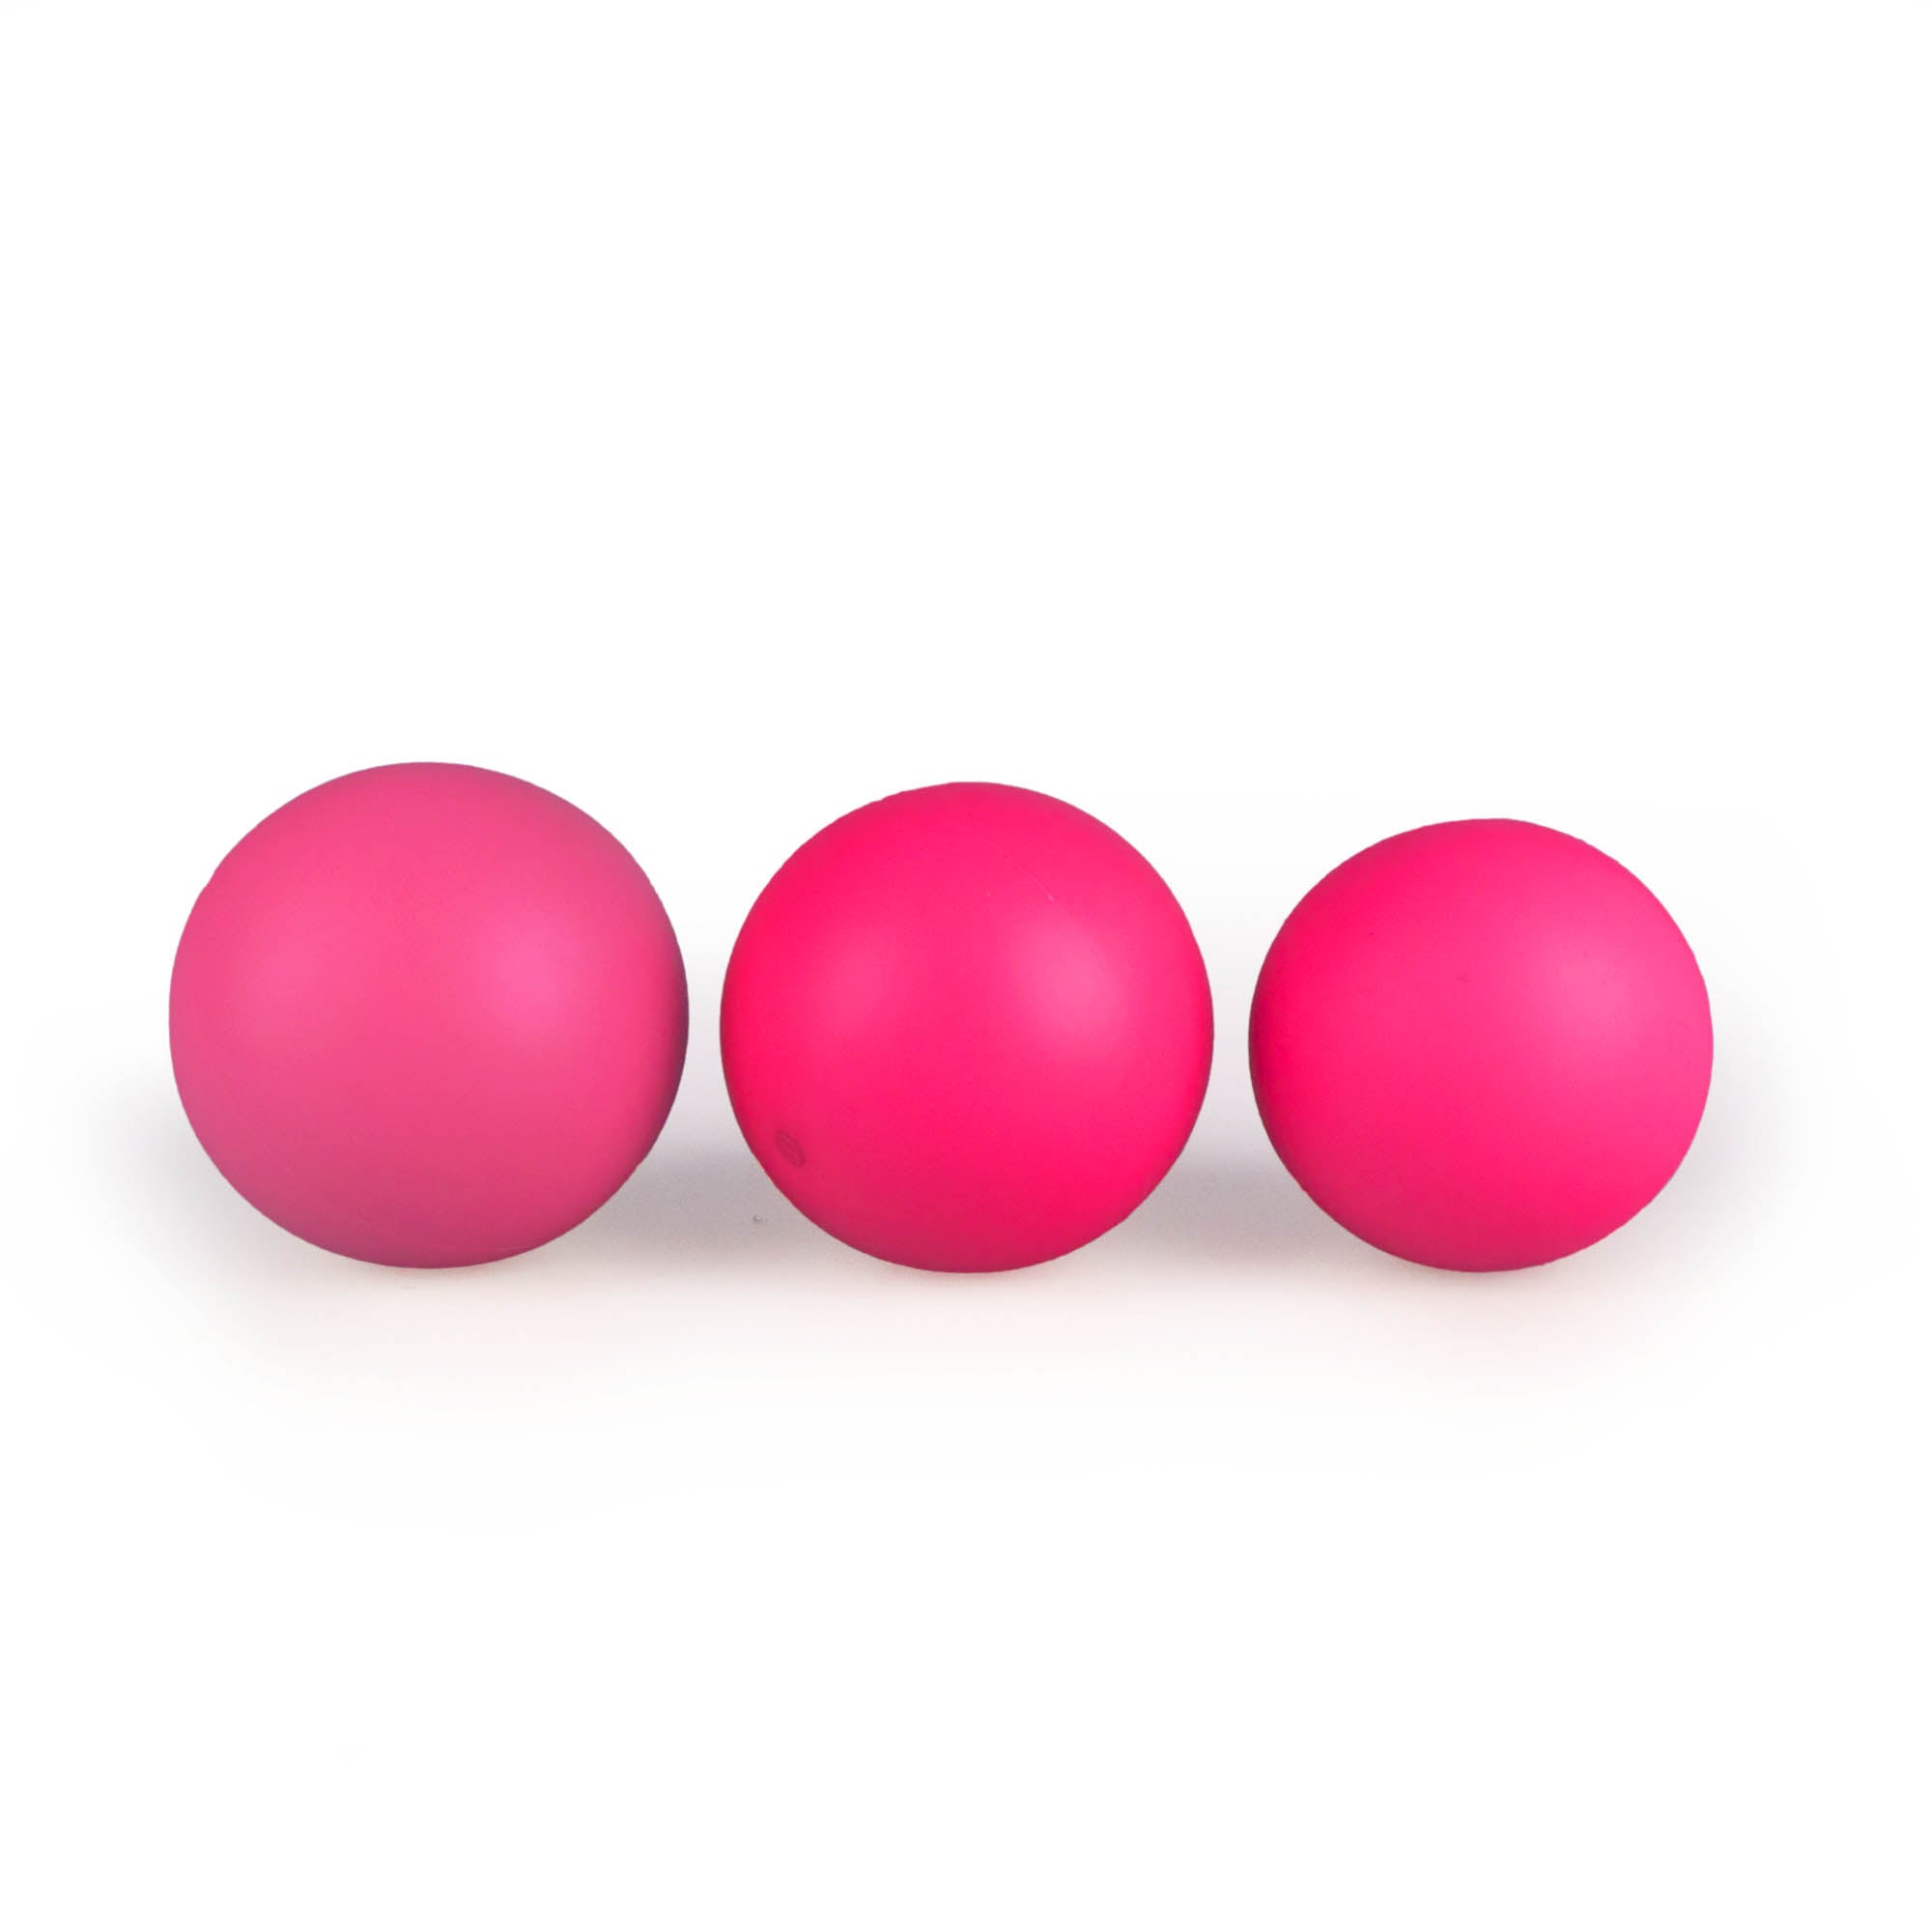 MMX juggling ball comparison shot in pink